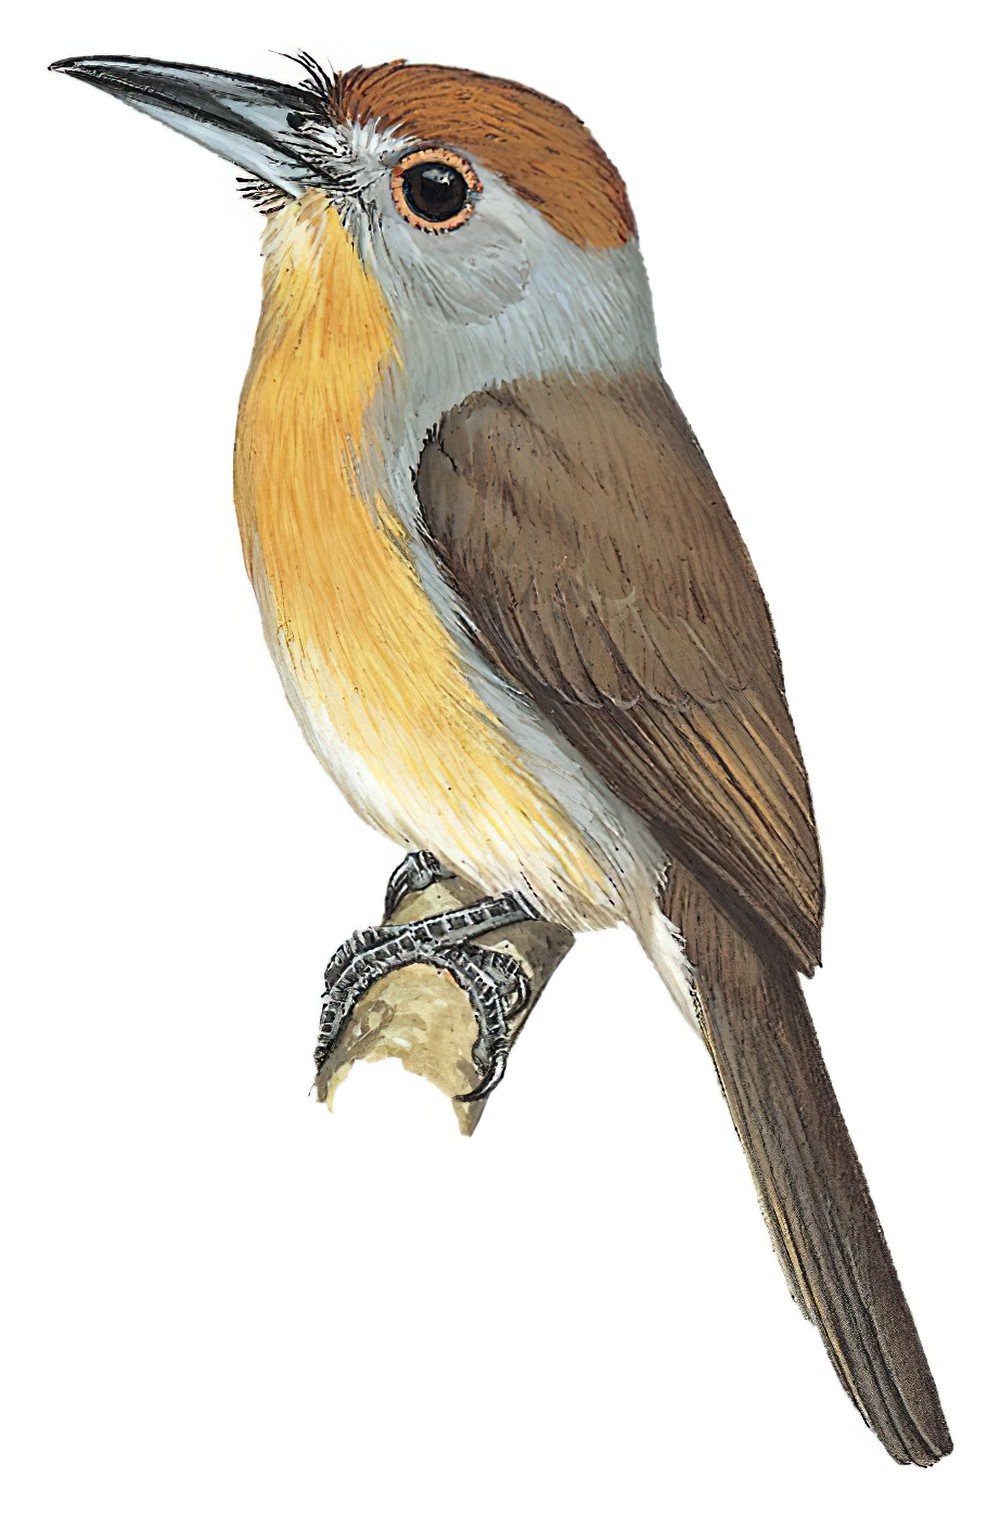 Rufous-capped Nunlet / Nonnula ruficapilla